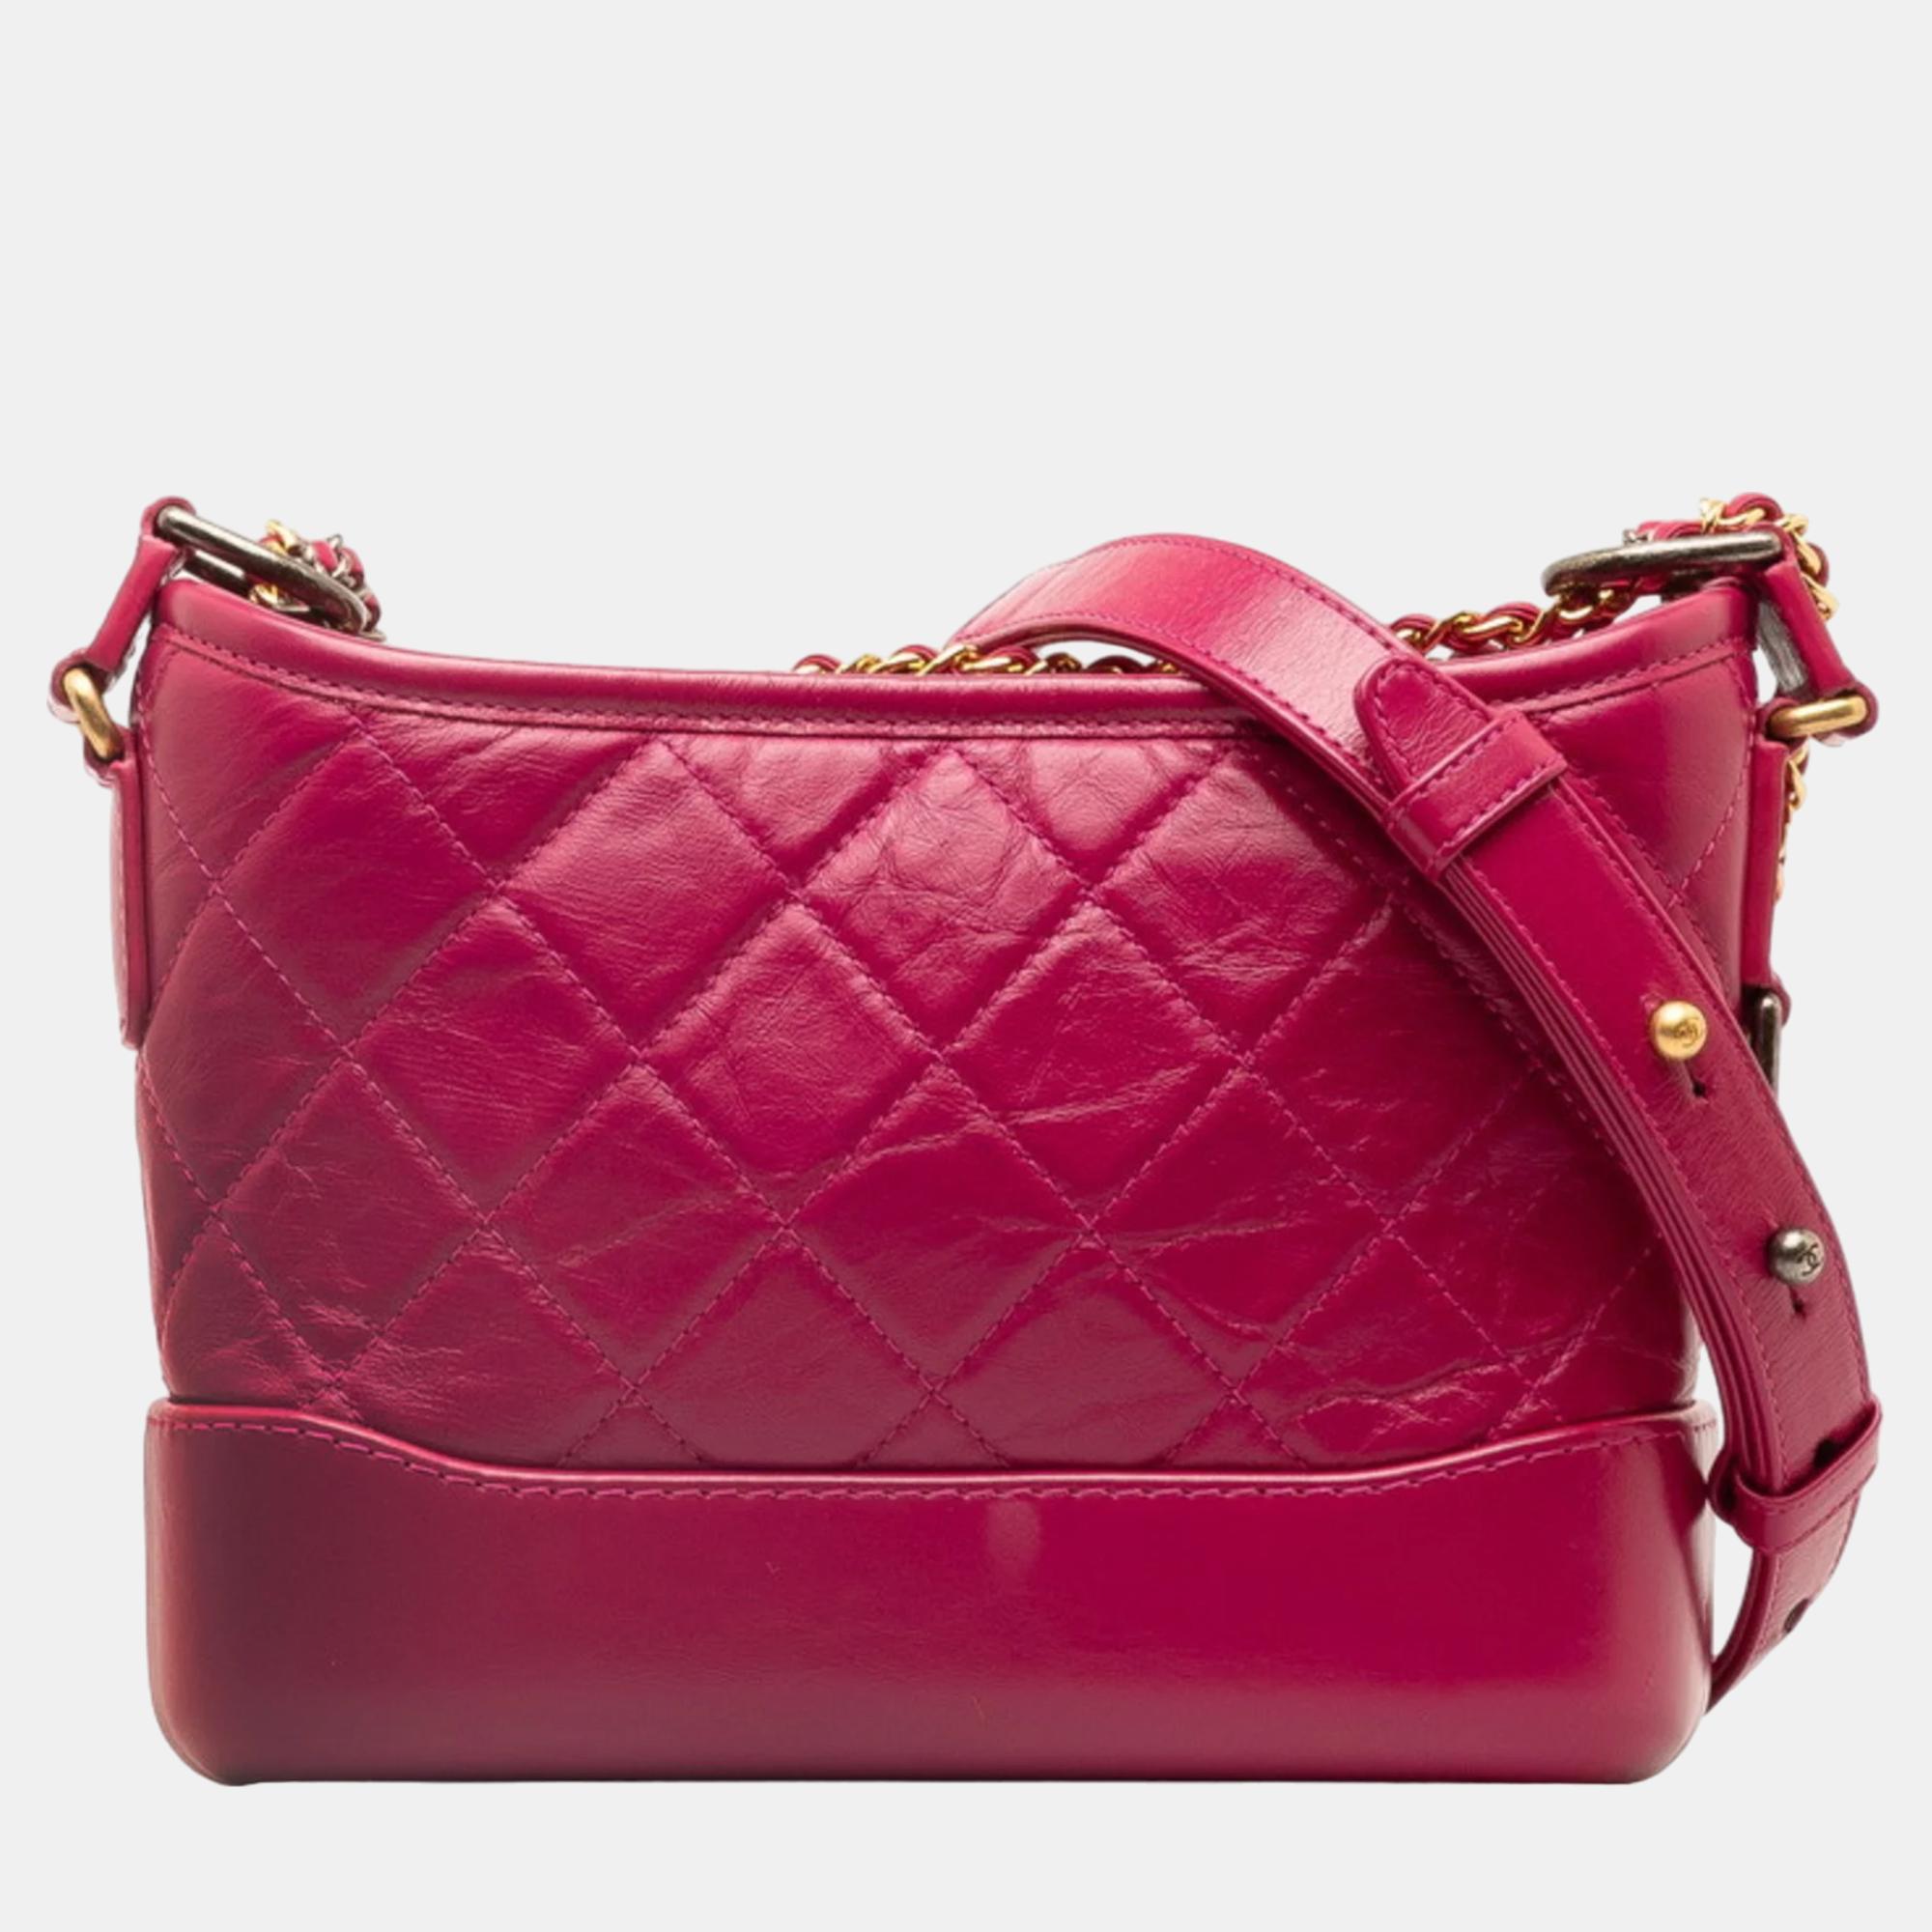 Chanel pink leather small gabrielle shoulder bag